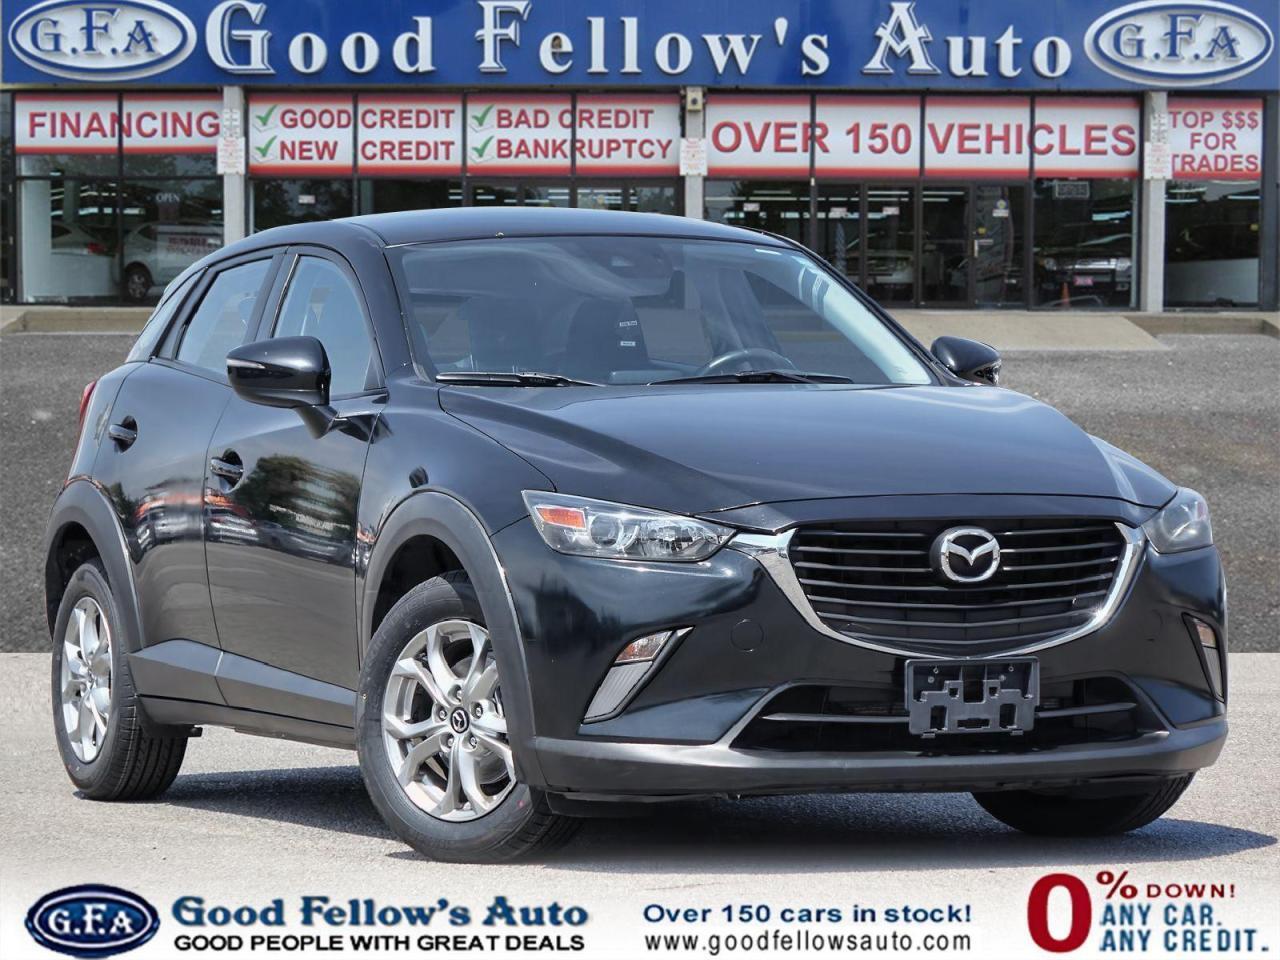 2018 Mazda CX-3 GS MODEL, HEATED SEATS, REARVIEW CAMERA, BLUETOOTH